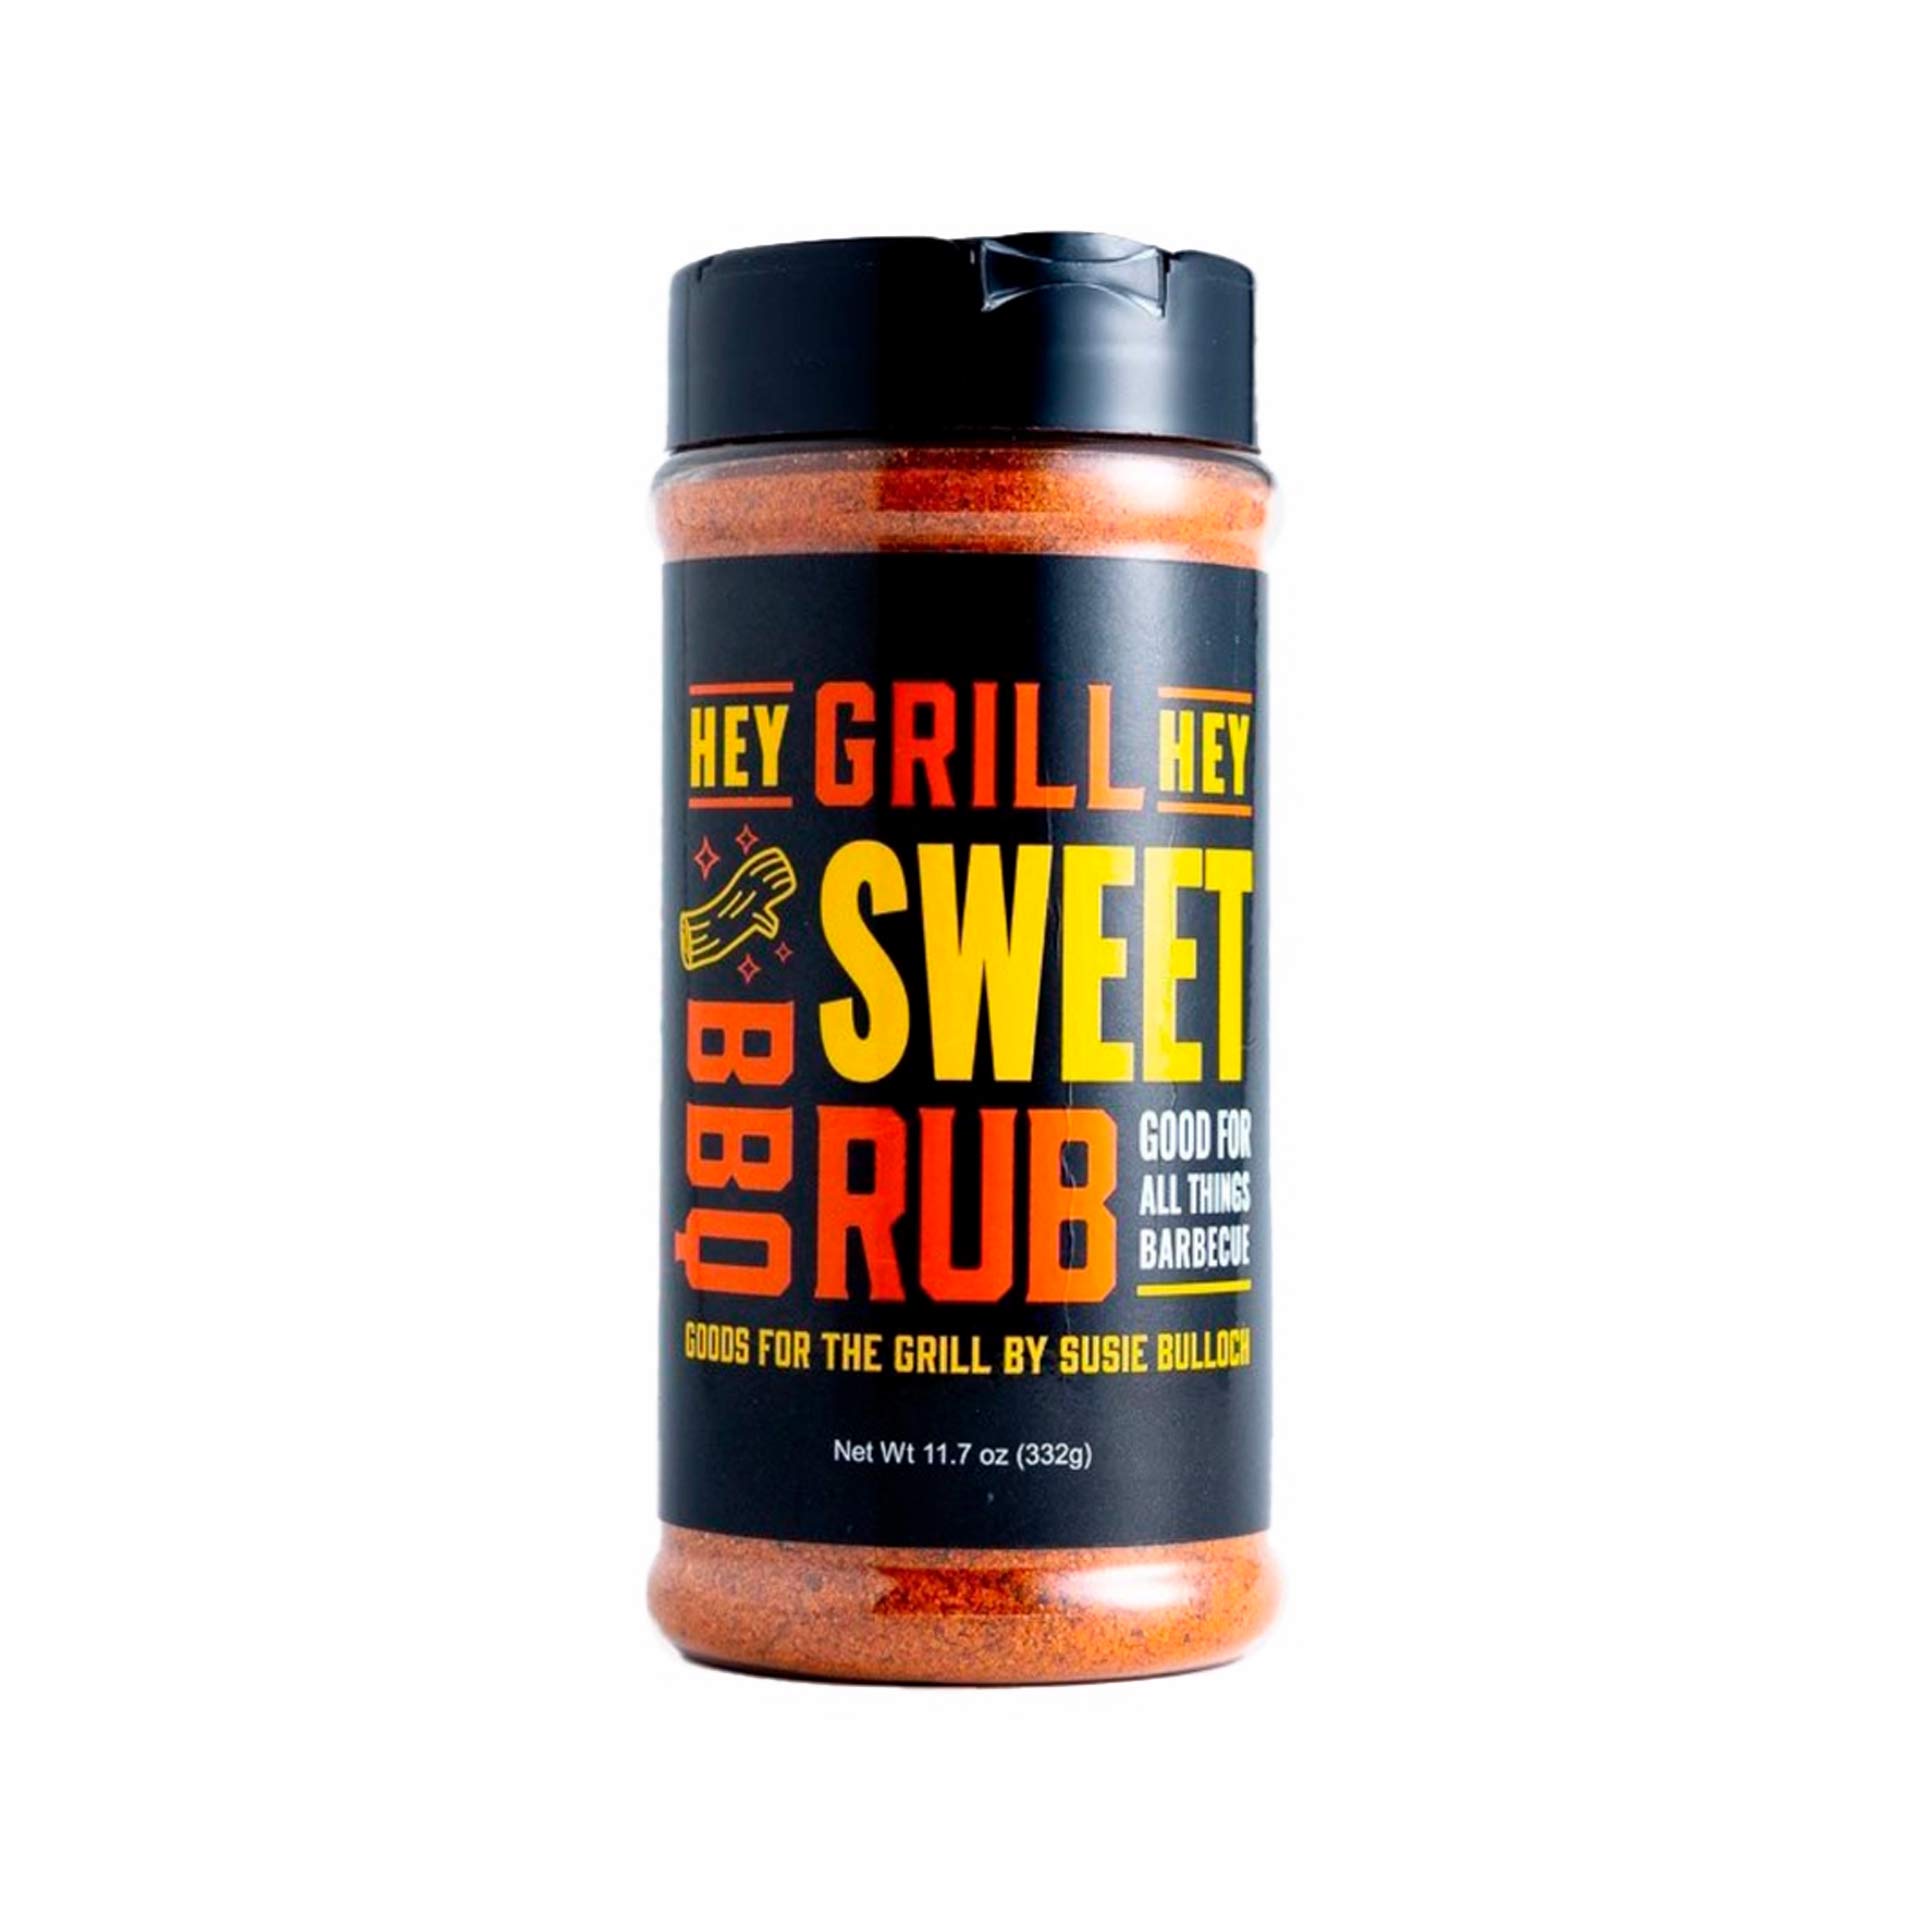 Hey Grill Hey Sweet Rub Herbs & Spices 12042852